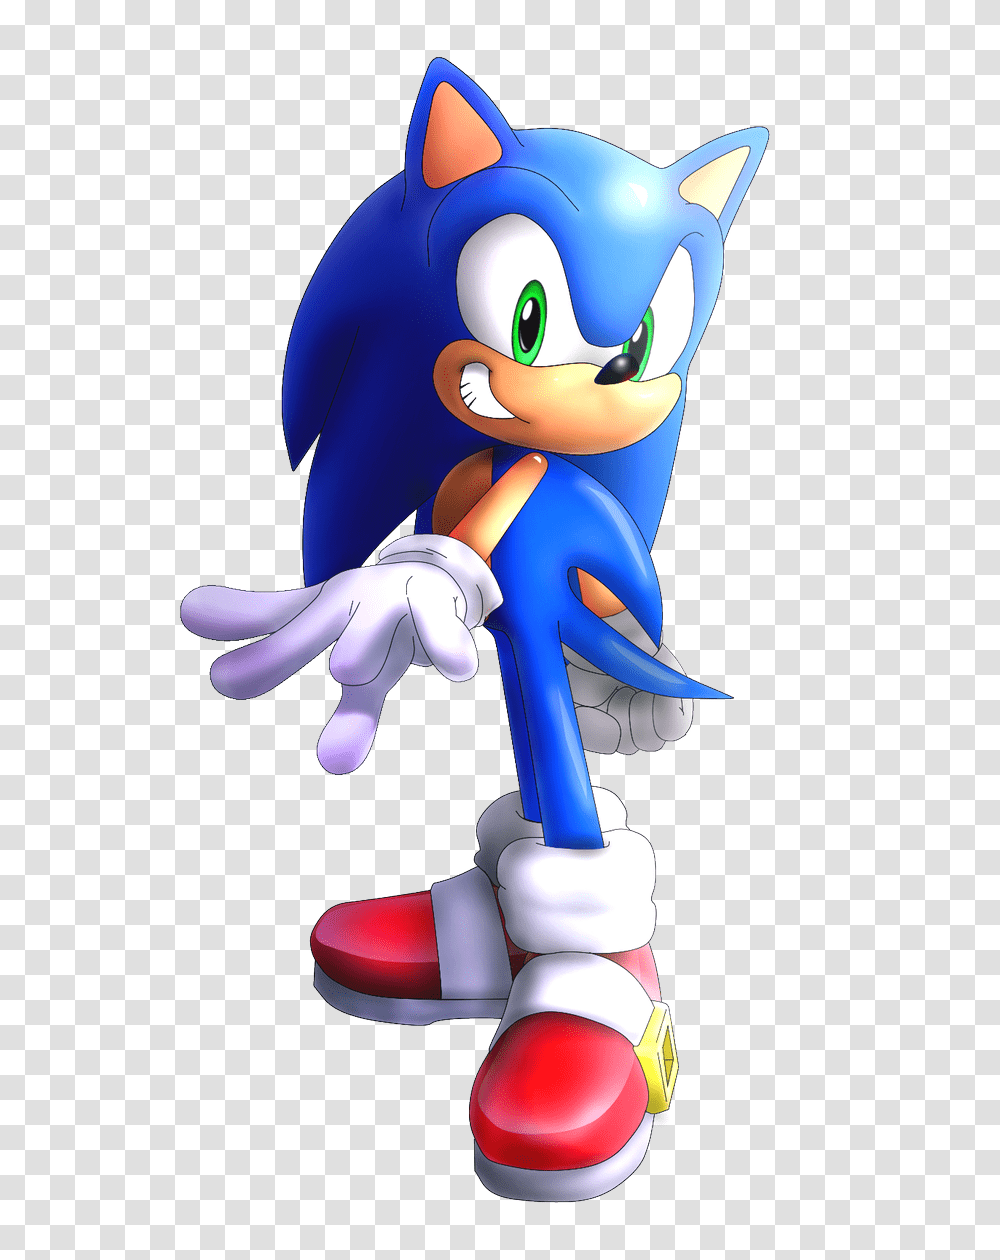 Download Hd Lixes Sonic The Hedgehog No Sonic The Hedgehog With Background, Toy, Graphics, Art, Manga Transparent Png